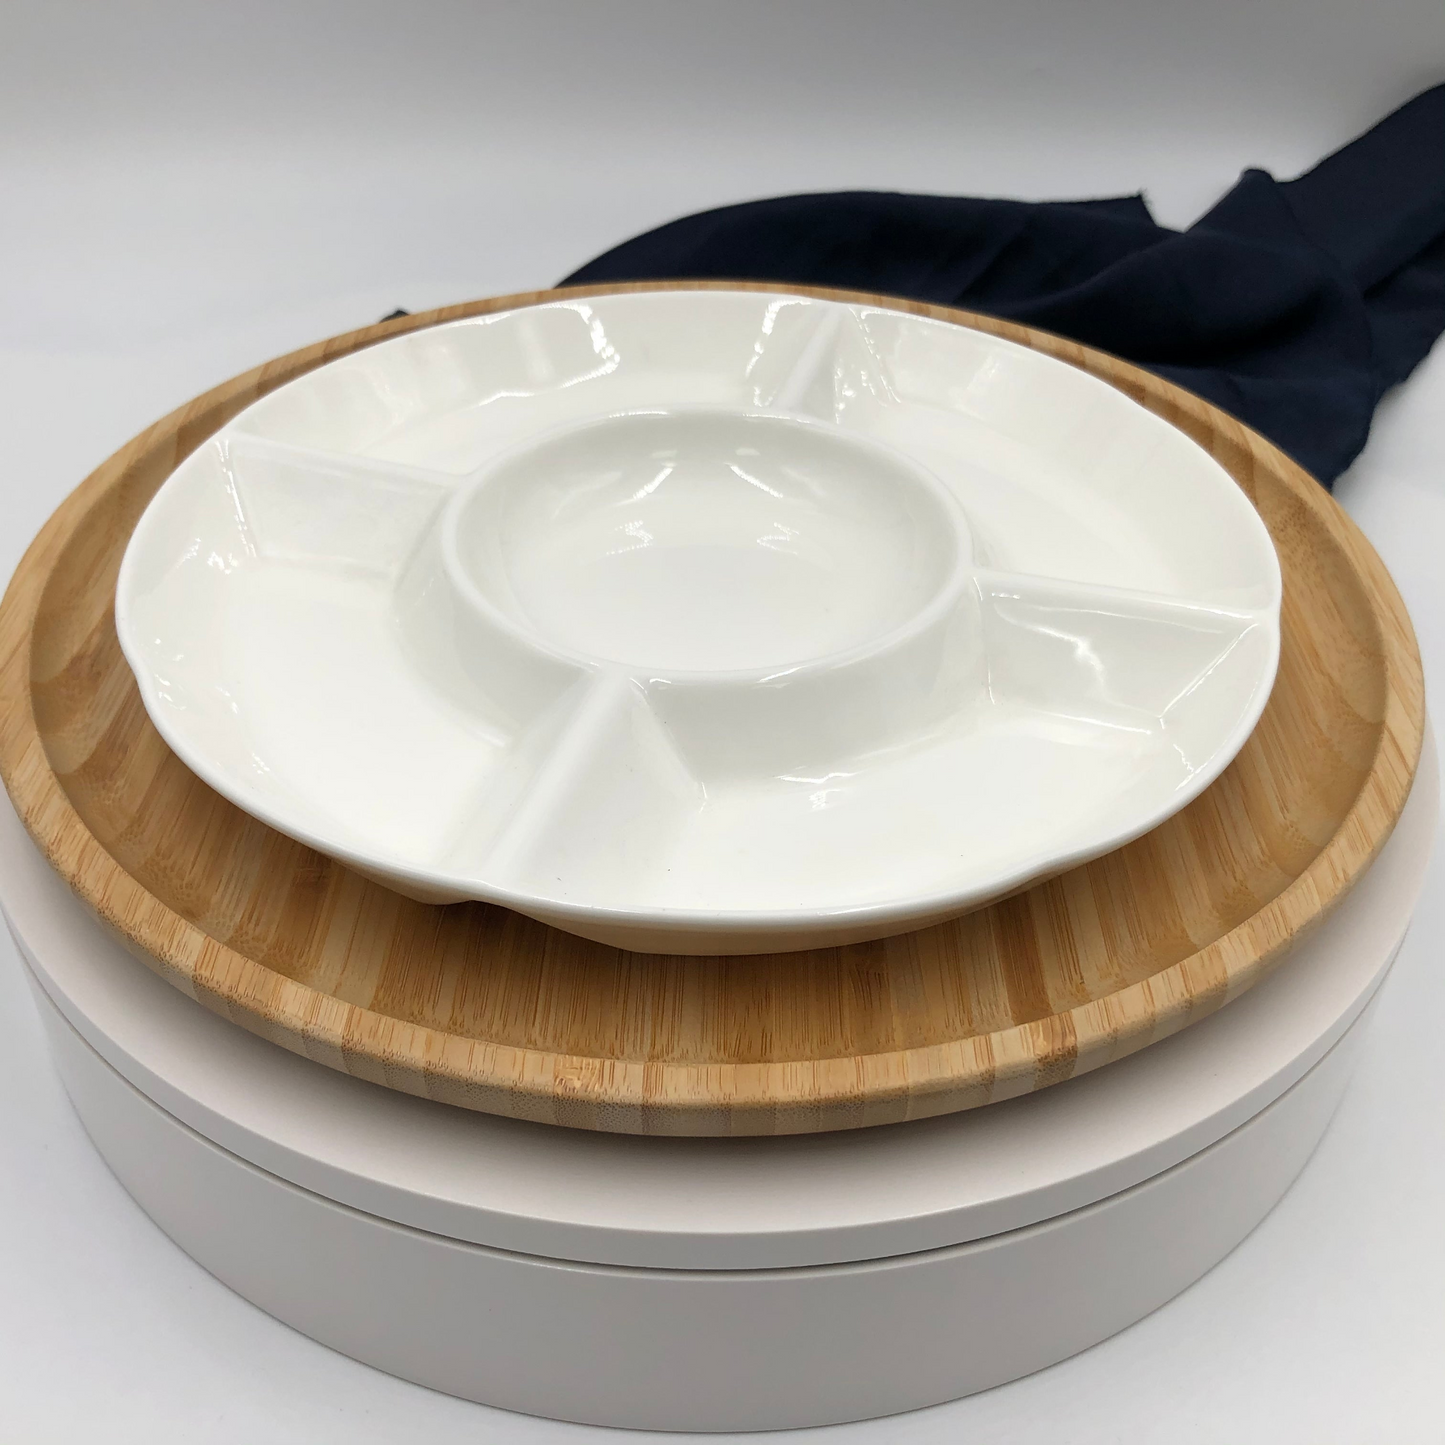 Wilmax Bamboo And Fine Porcelain 5 Section Divided Dish/plate Setting  WL-555071